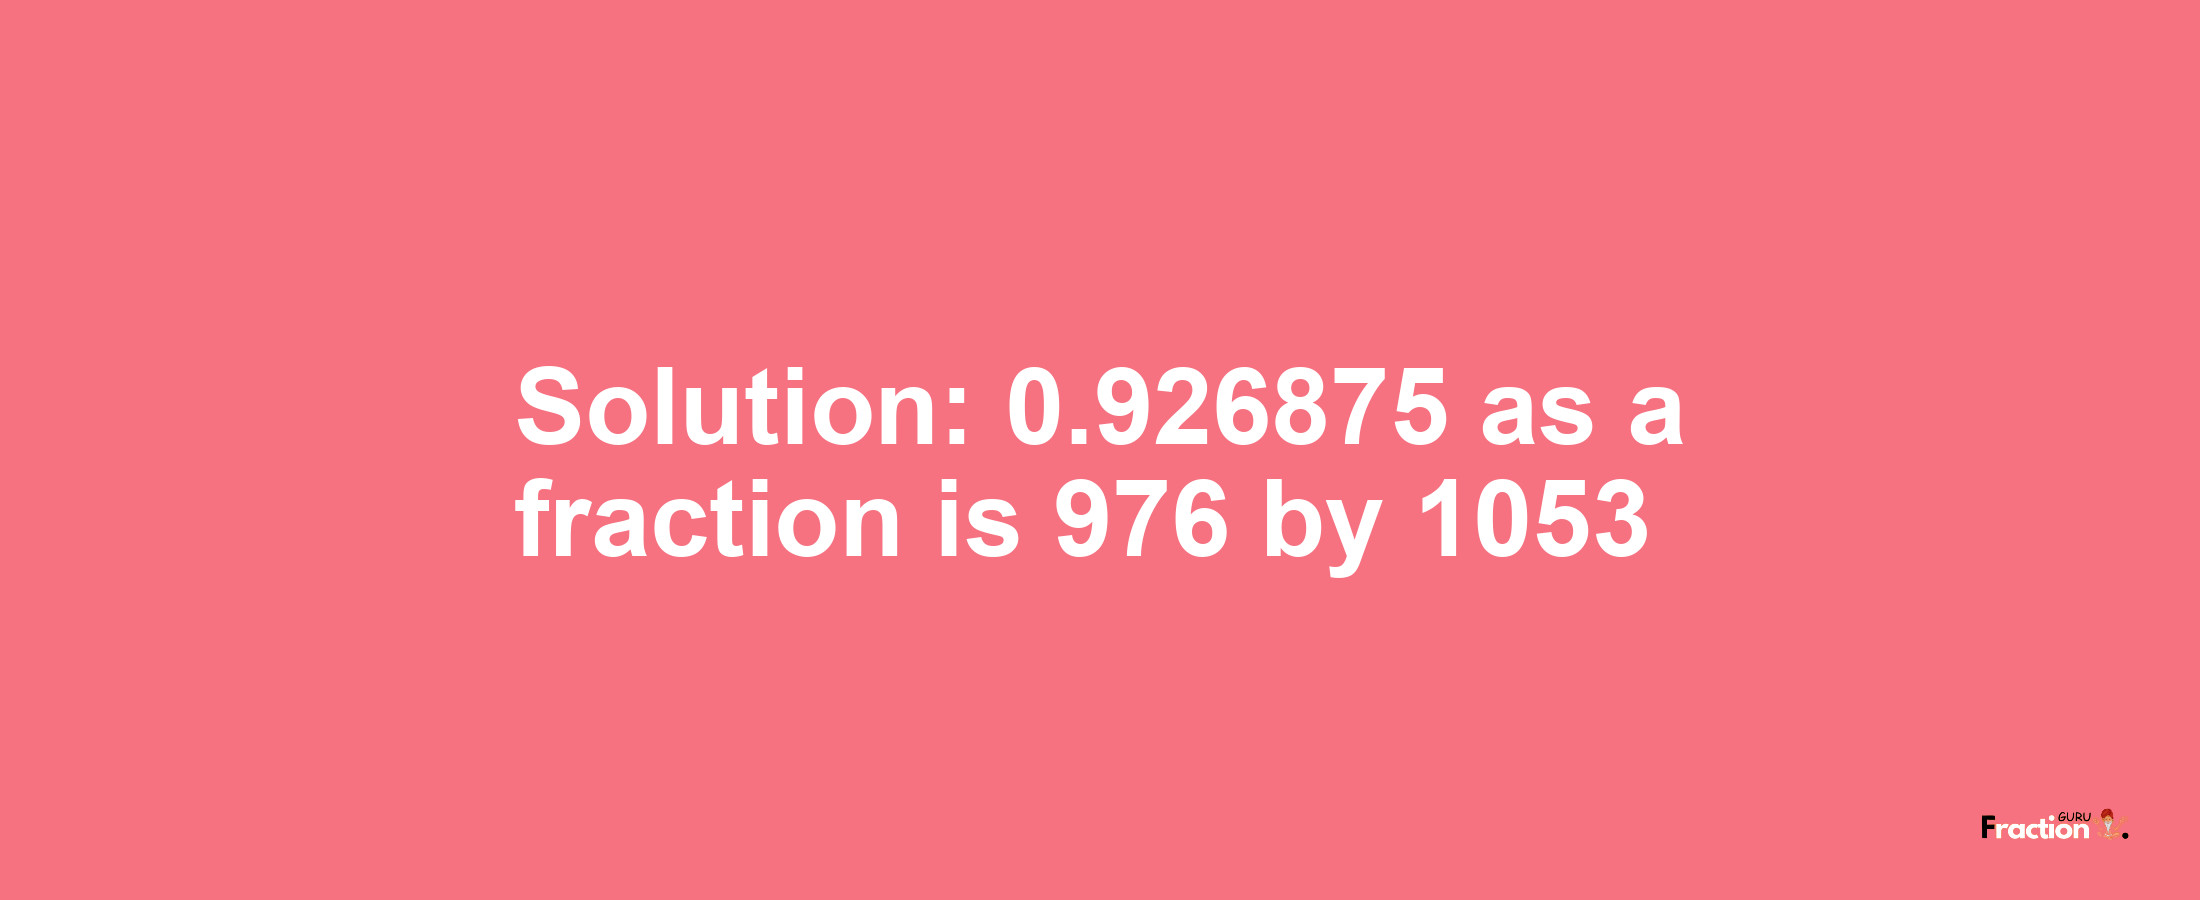 Solution:0.926875 as a fraction is 976/1053